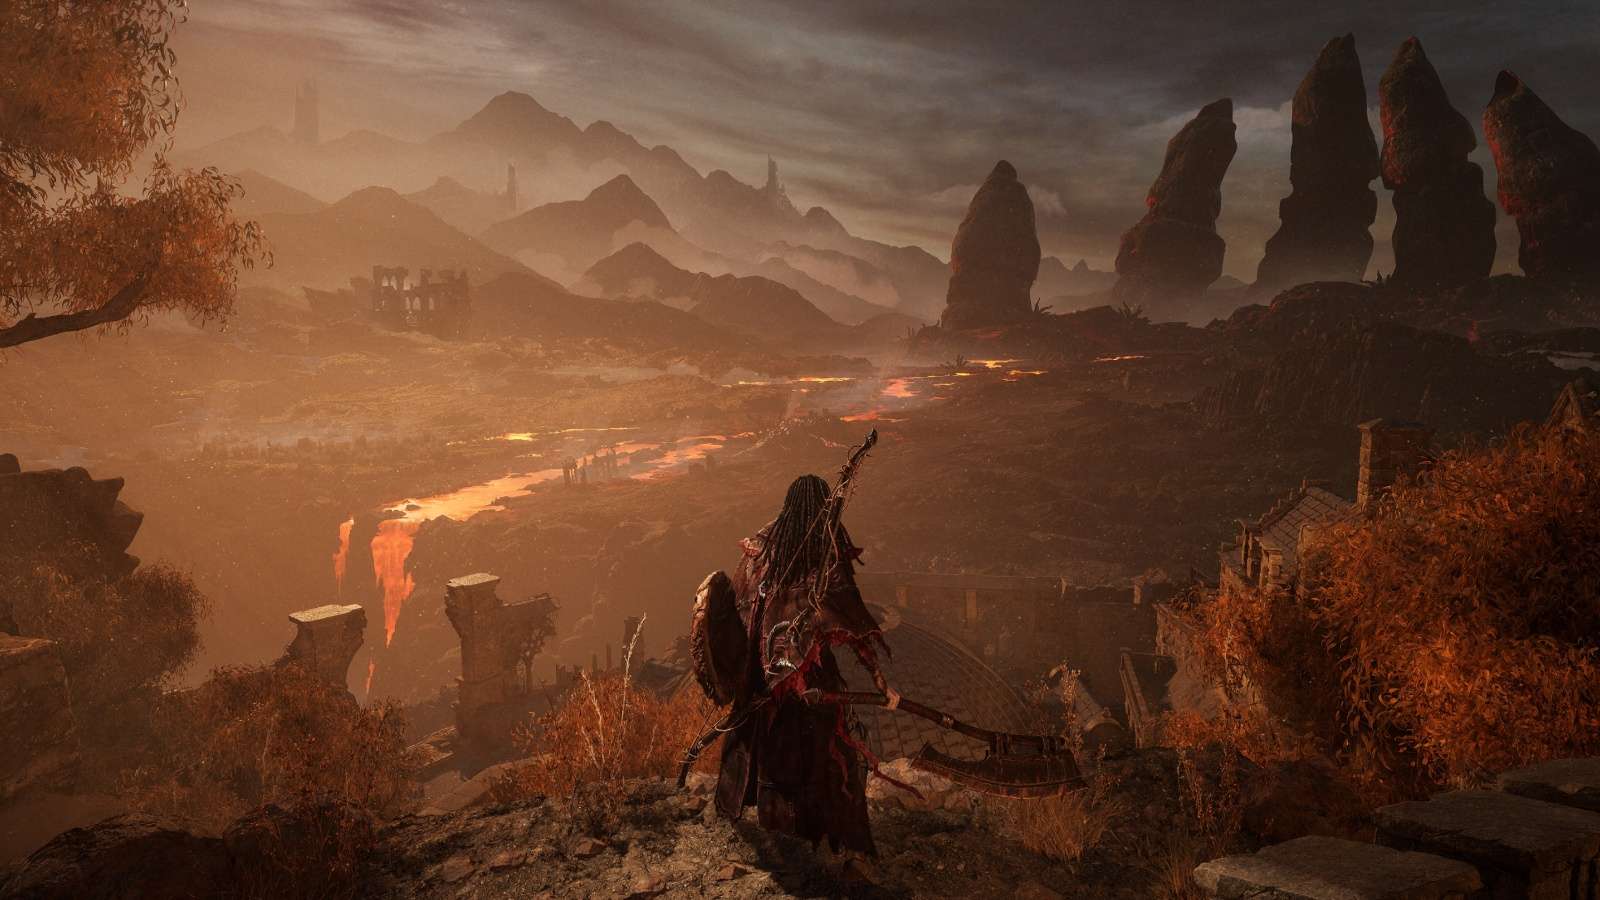 A screenshot from the game Lords of the Fallen